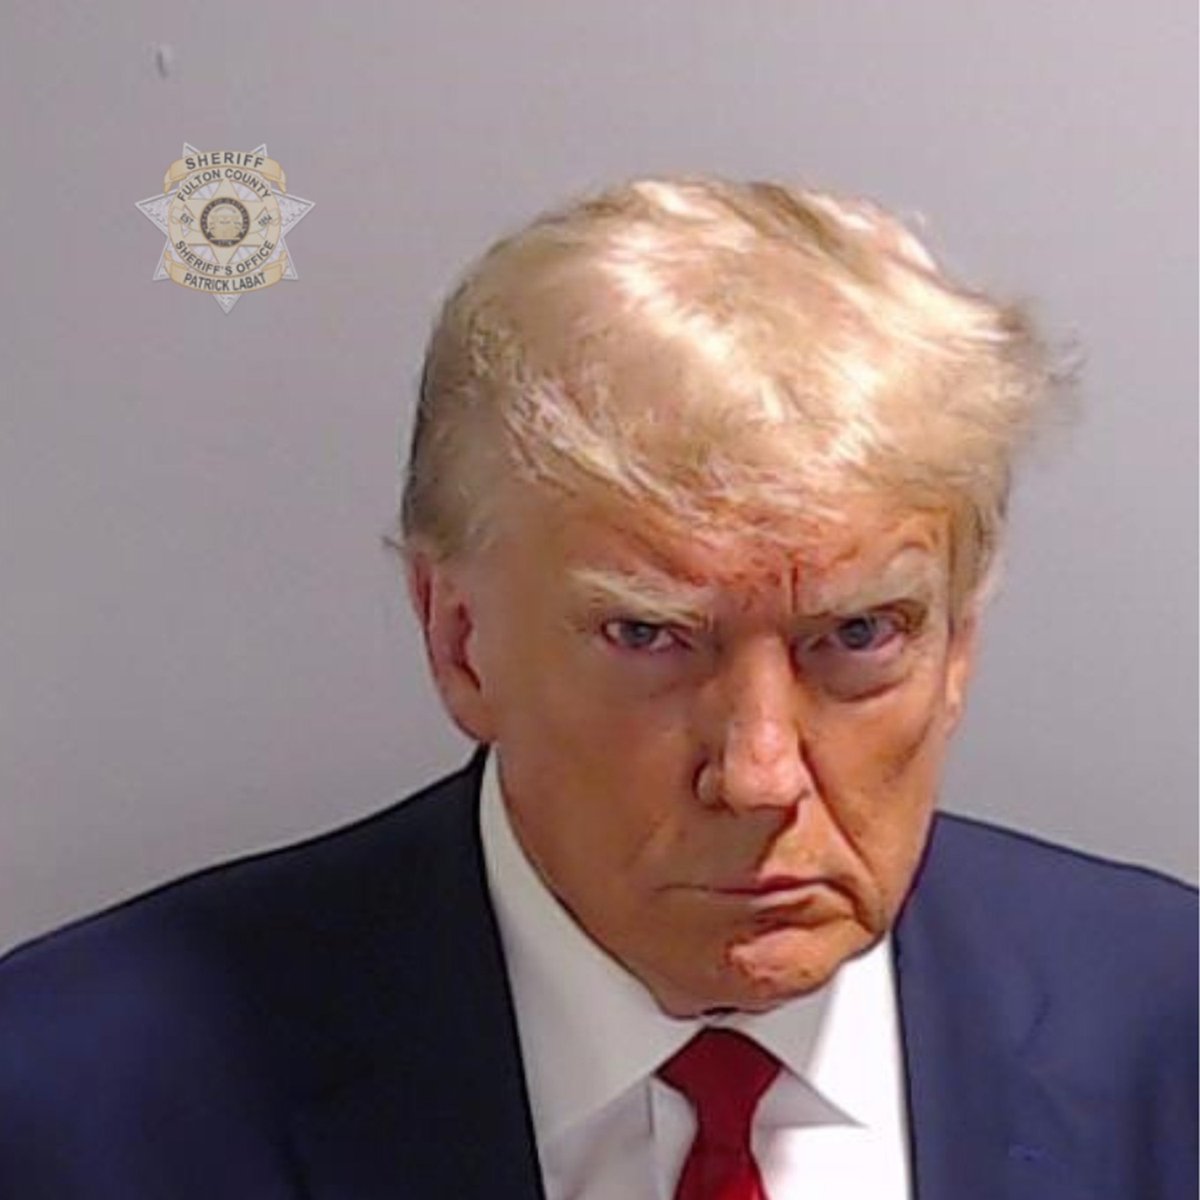 No sitting or former U.S. president had his booking photo taken – until now. What to know: usatoday.com/story/news/pol…